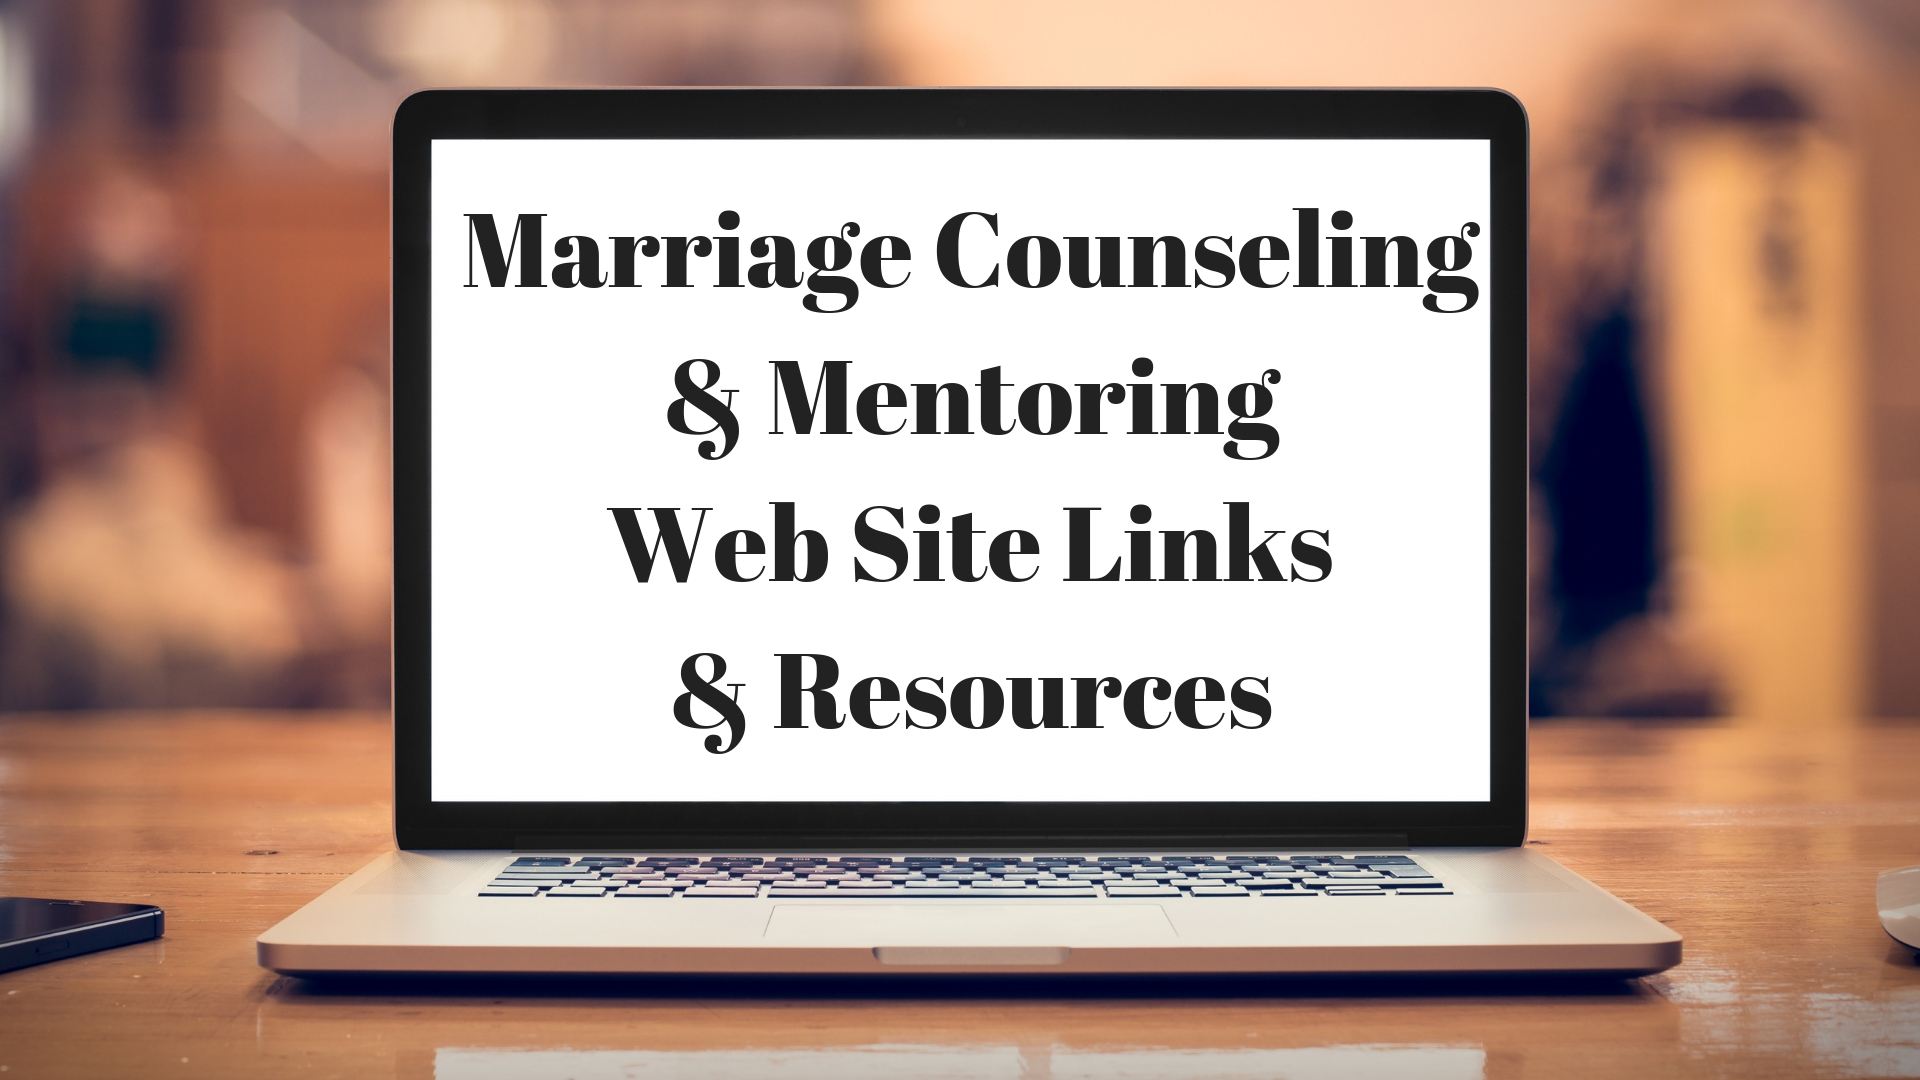 Marriage Counseling & Mentoring Links - Canva - Adobe Stock